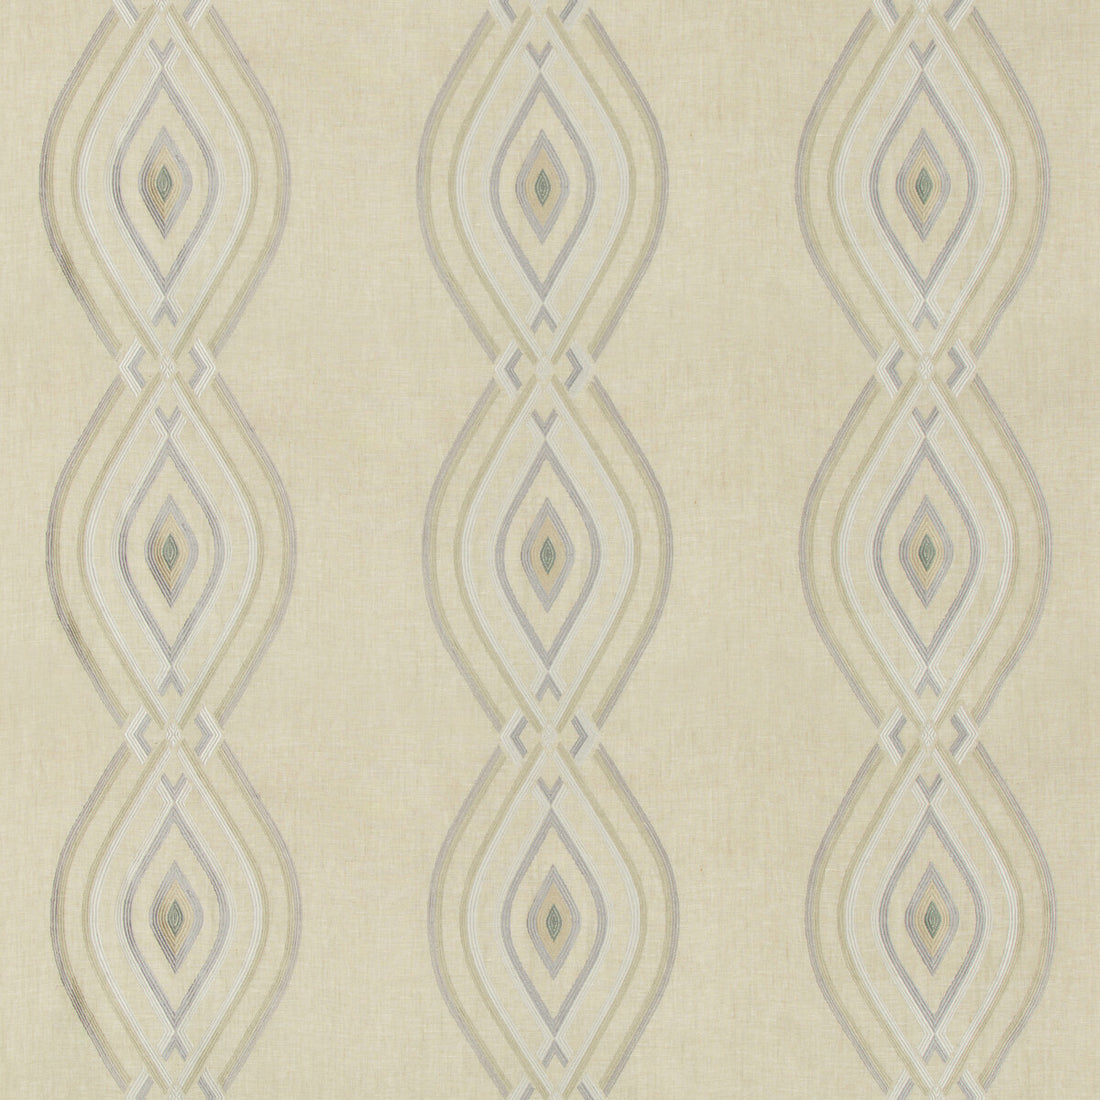 Ora Embroidery fabric in bluff color - pattern 2017172.111.0 - by Lee Jofa in the Westport collection